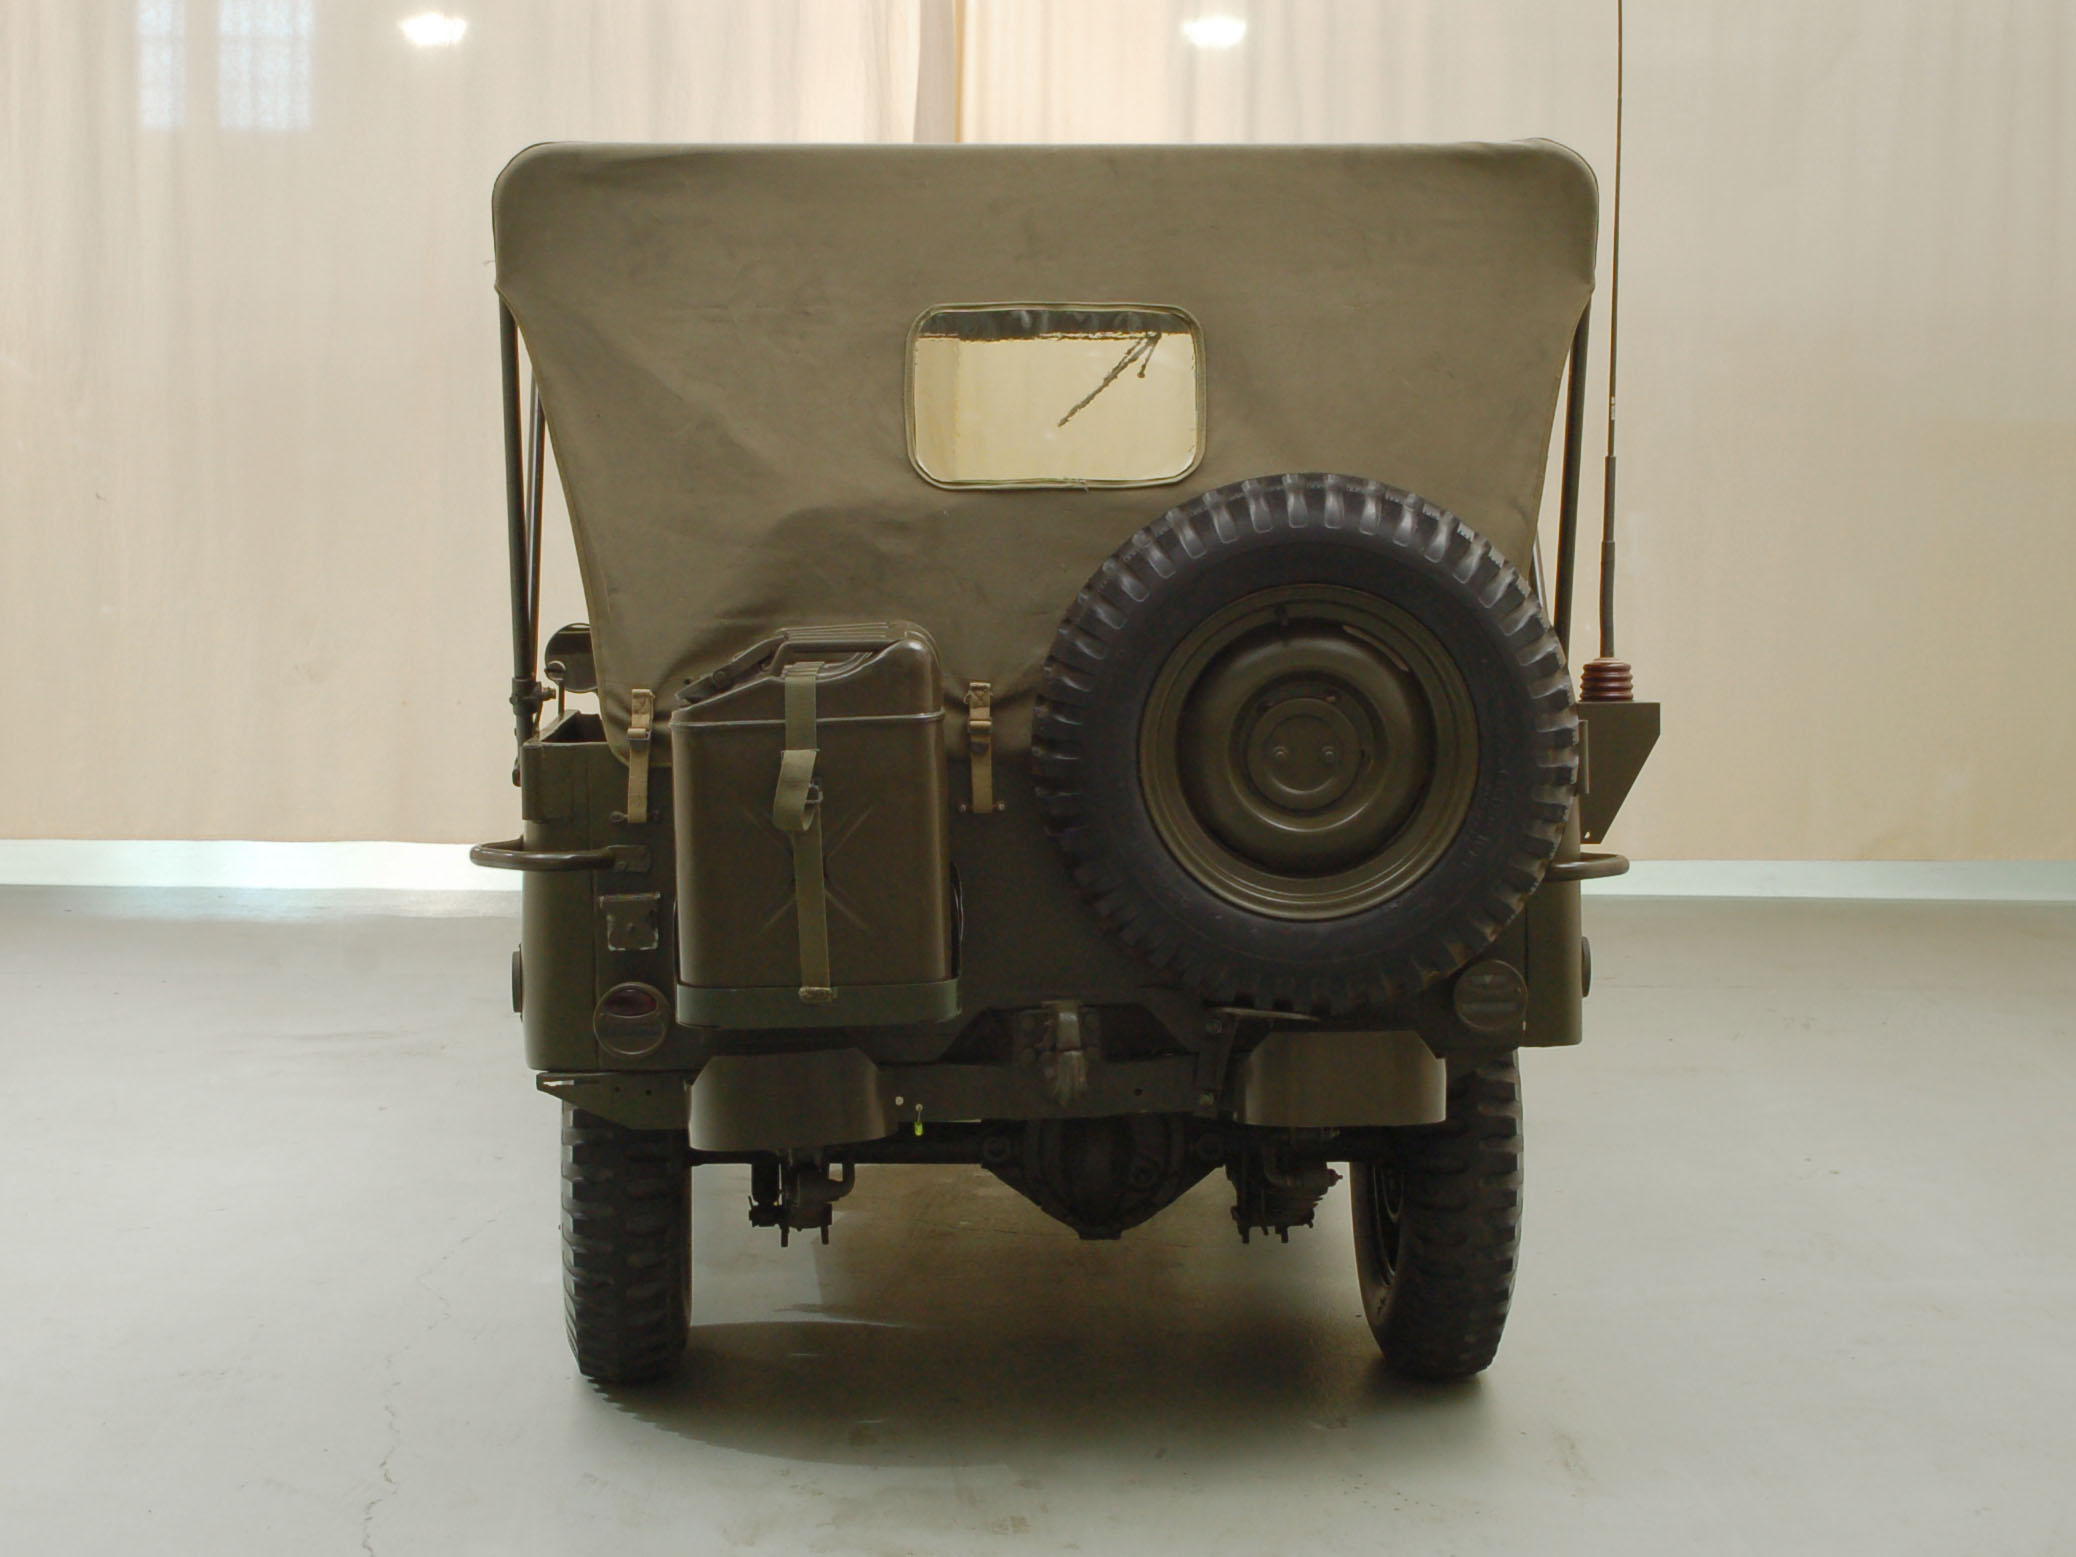 1945 willys-overland mb (jeep) 1/4 ton